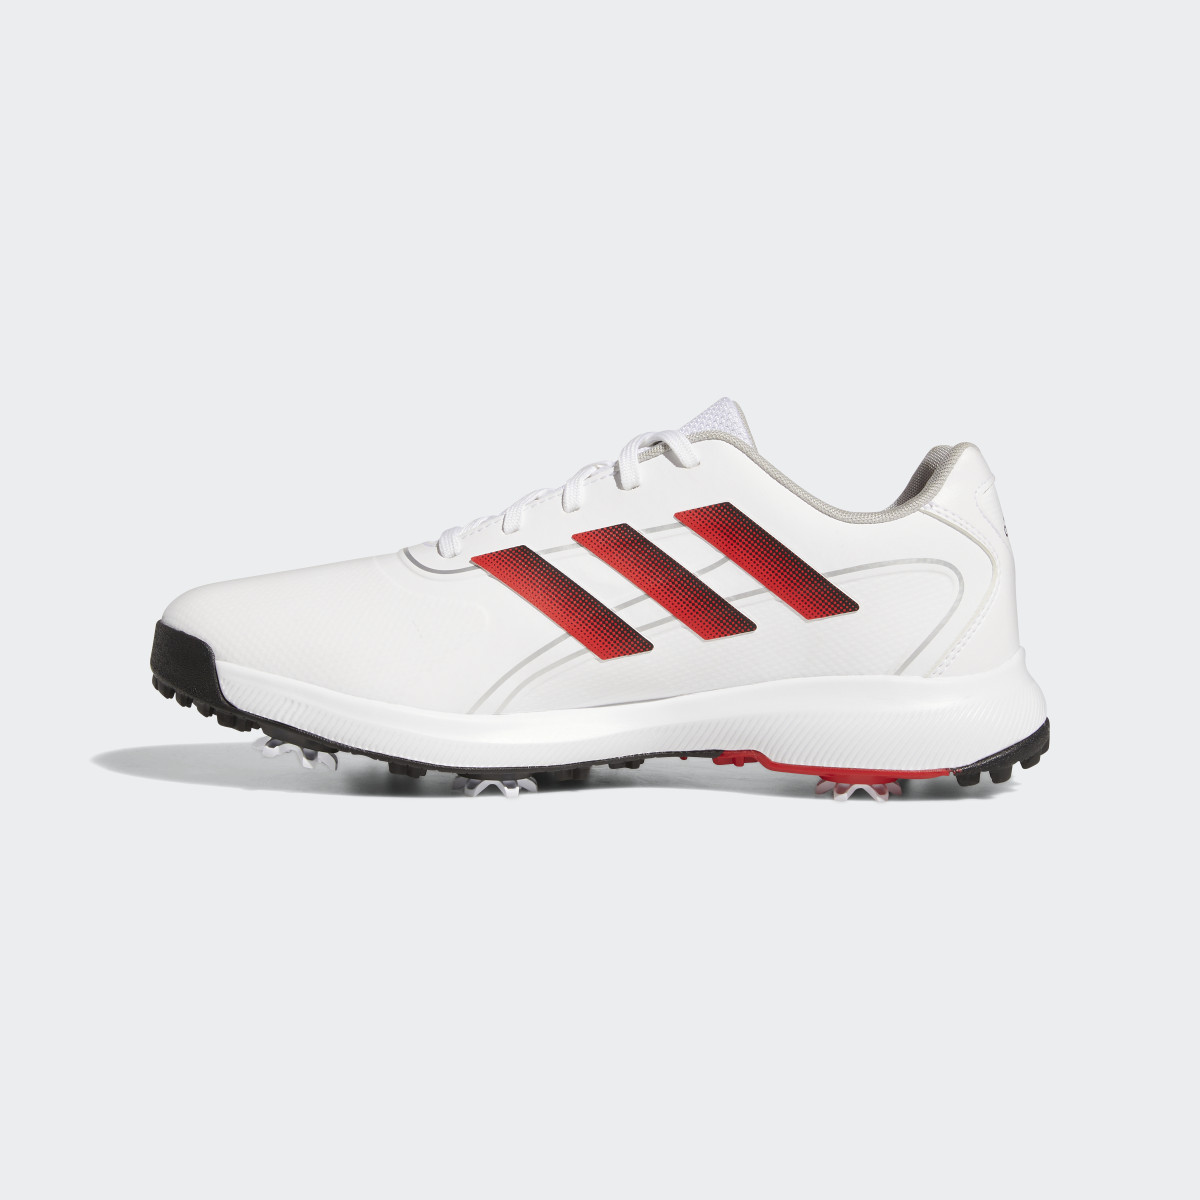 Adidas Traxion Lite Max Wide Golf Shoes. 7